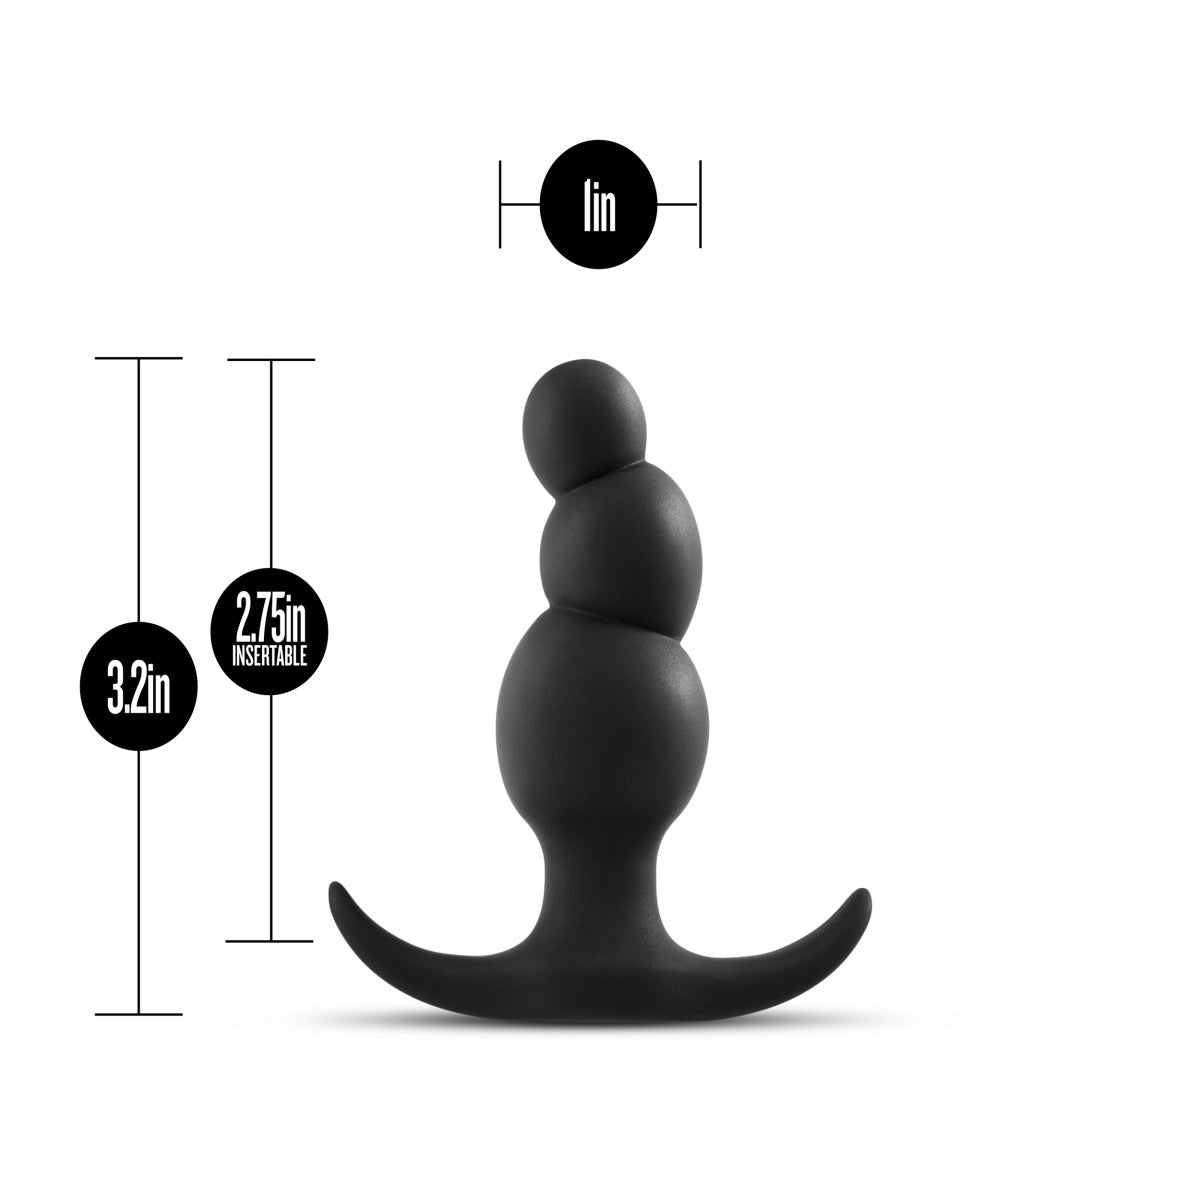 Black plug with flared anchor base and narrow neck. Plug features a slight curve with 3 beads of gradual size from small at the tip to larger near the base. There is almost no separation between each bead. Additional images show alternate angles and highlight features as listed in description and/or bullet points.